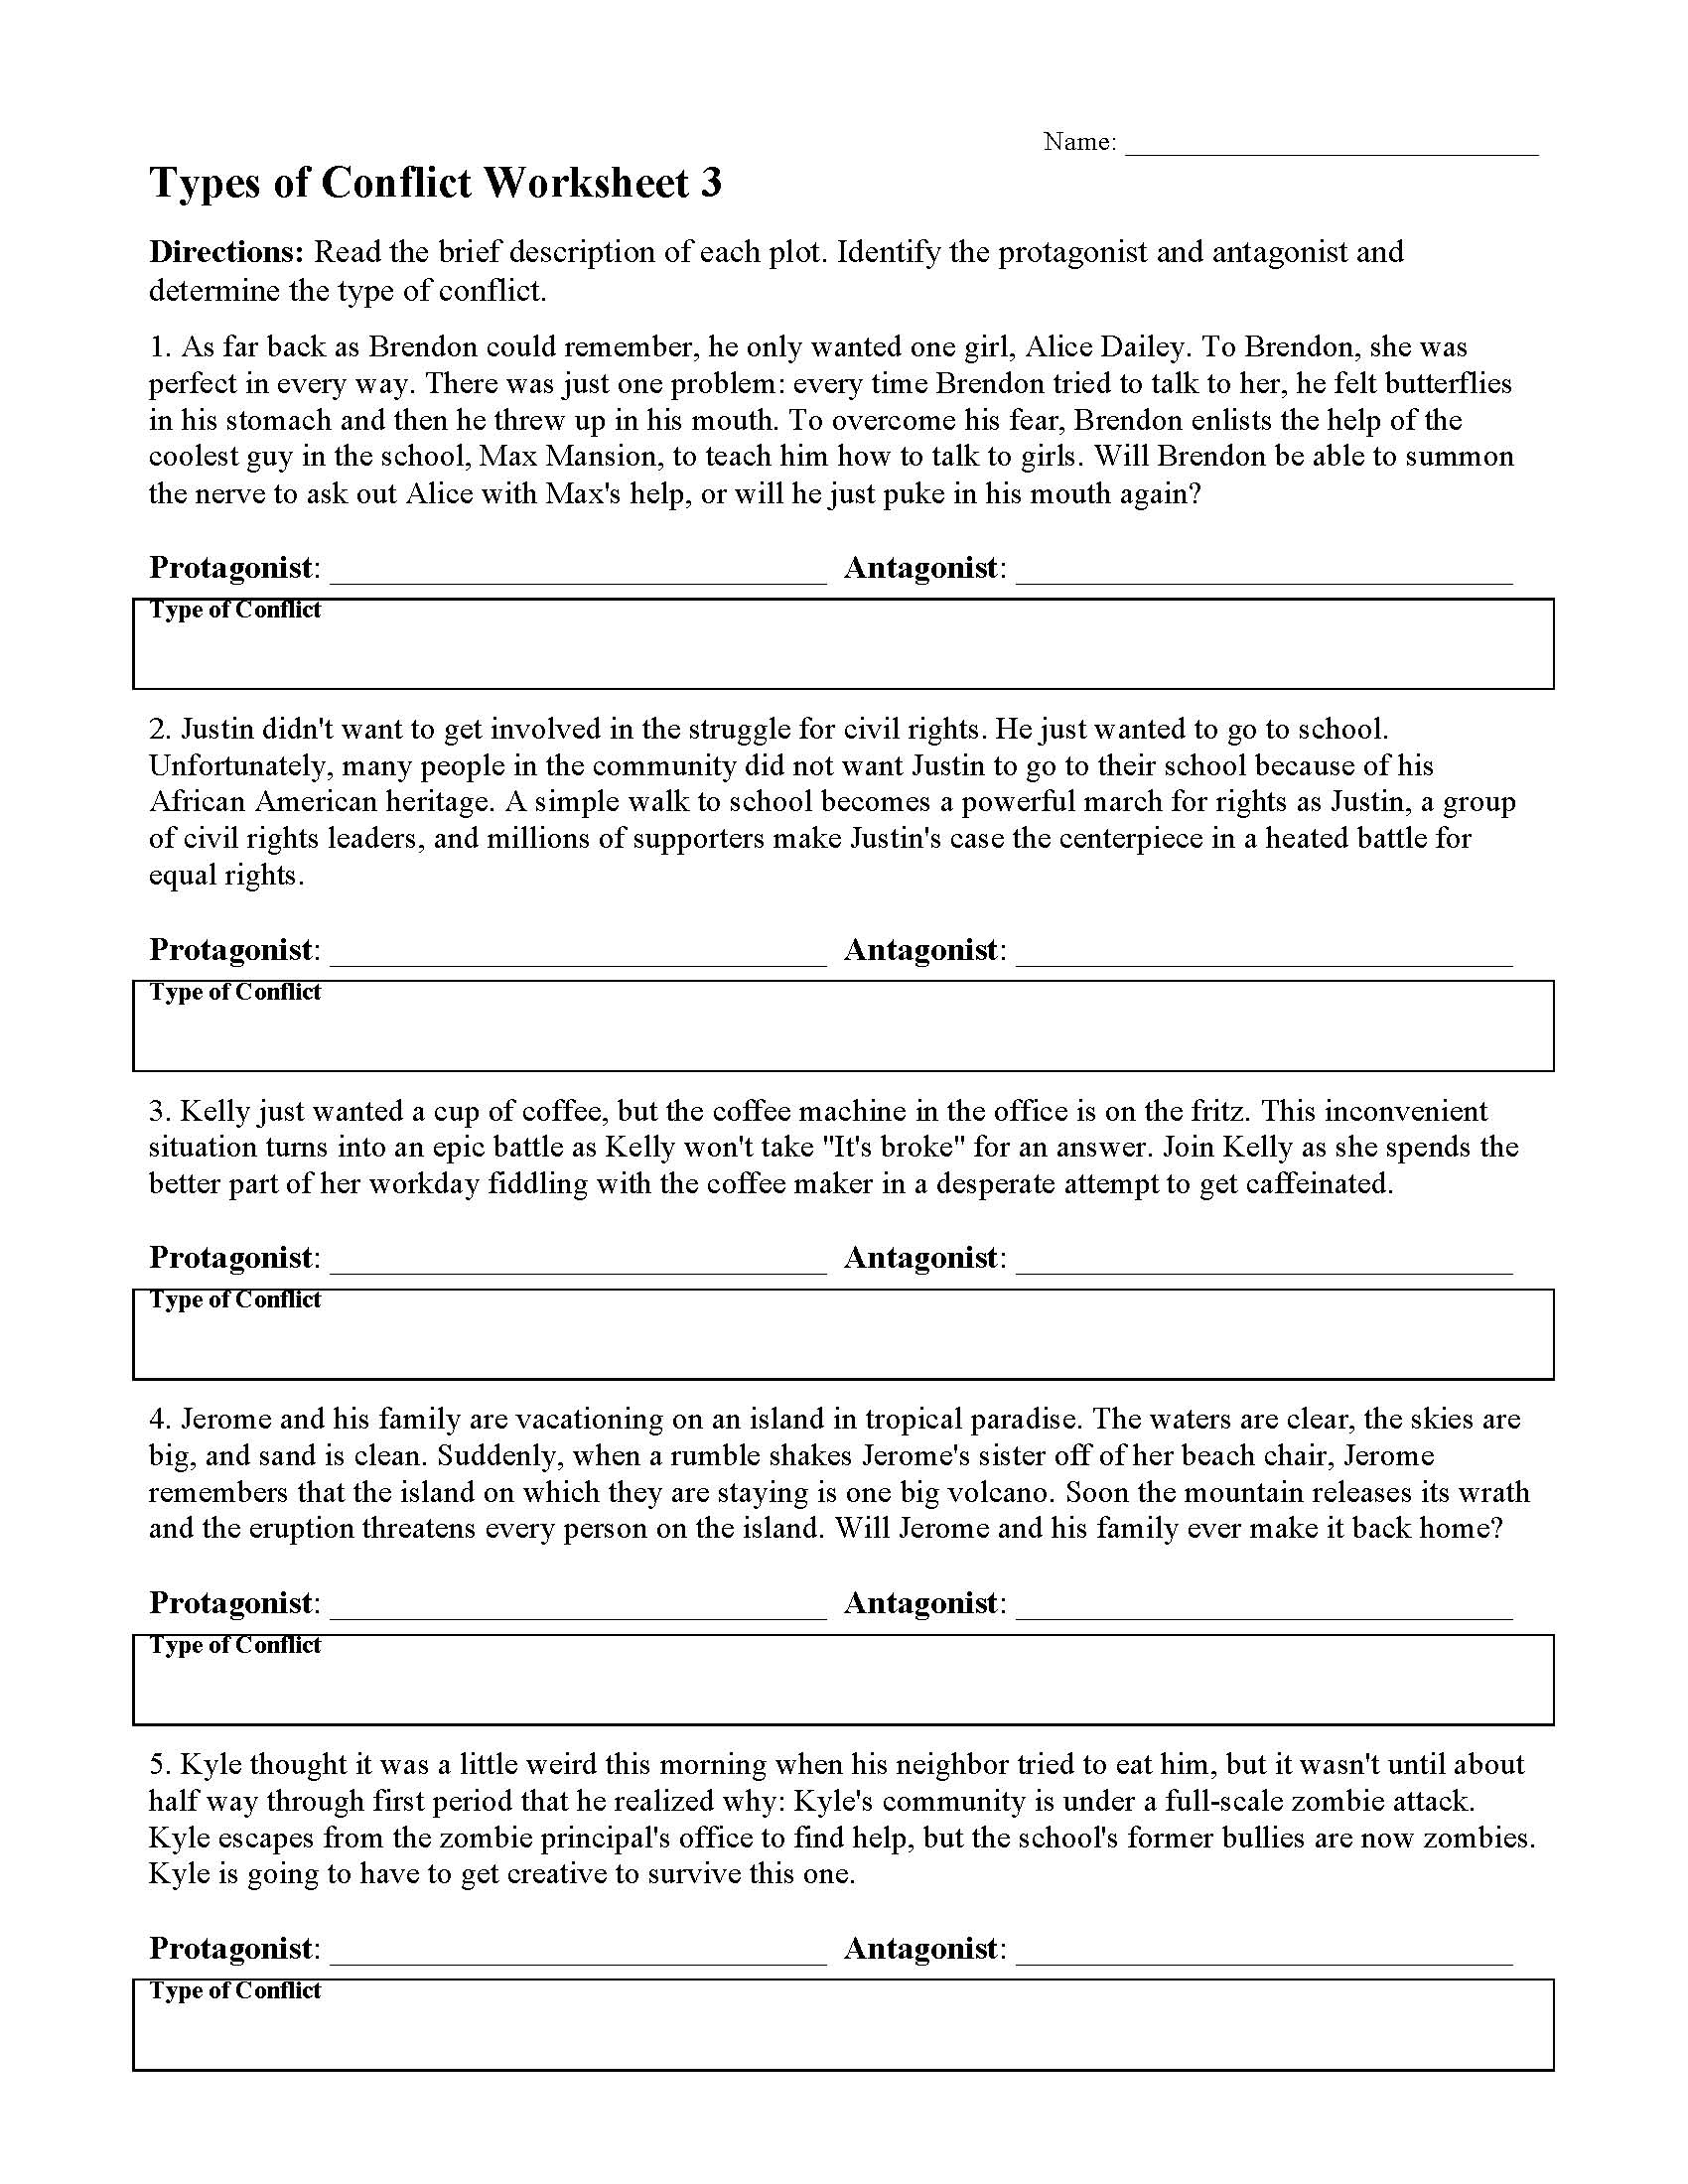 Types of Conflicts in Stories - Worksheets & Lessons  Ereading For Types Of Conflict Worksheet